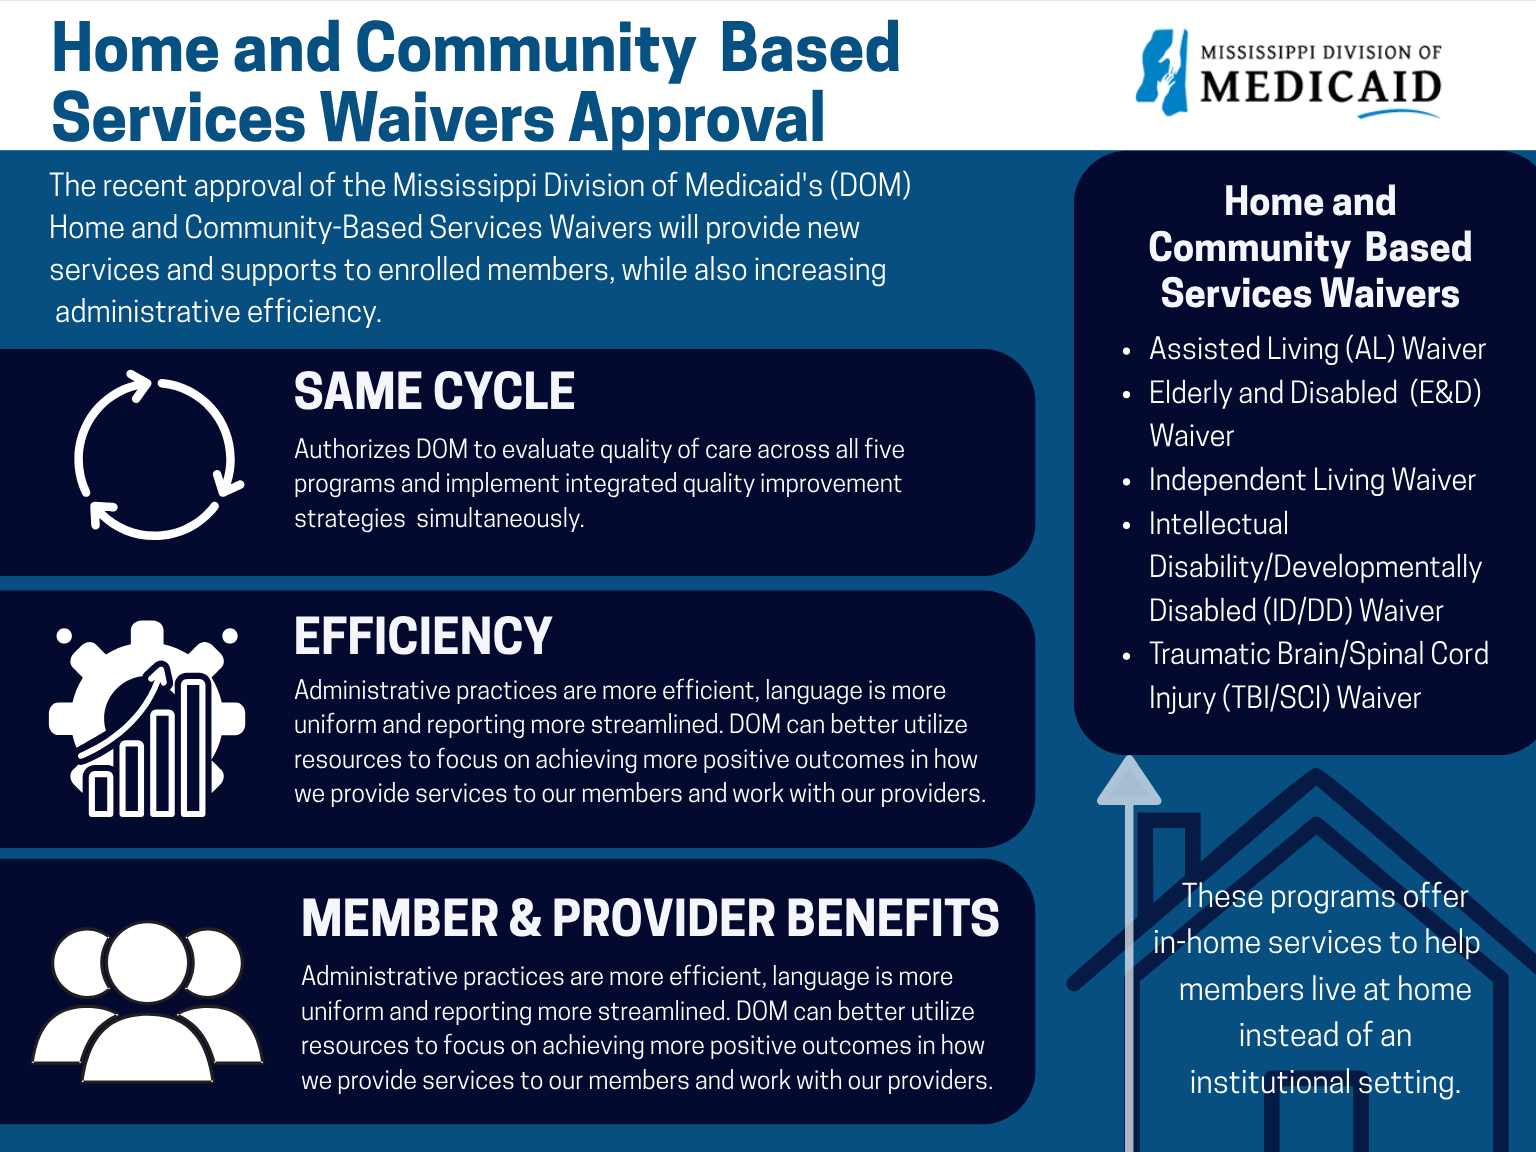 CMS approves renewal of Medicaid’s five Home and Community Based